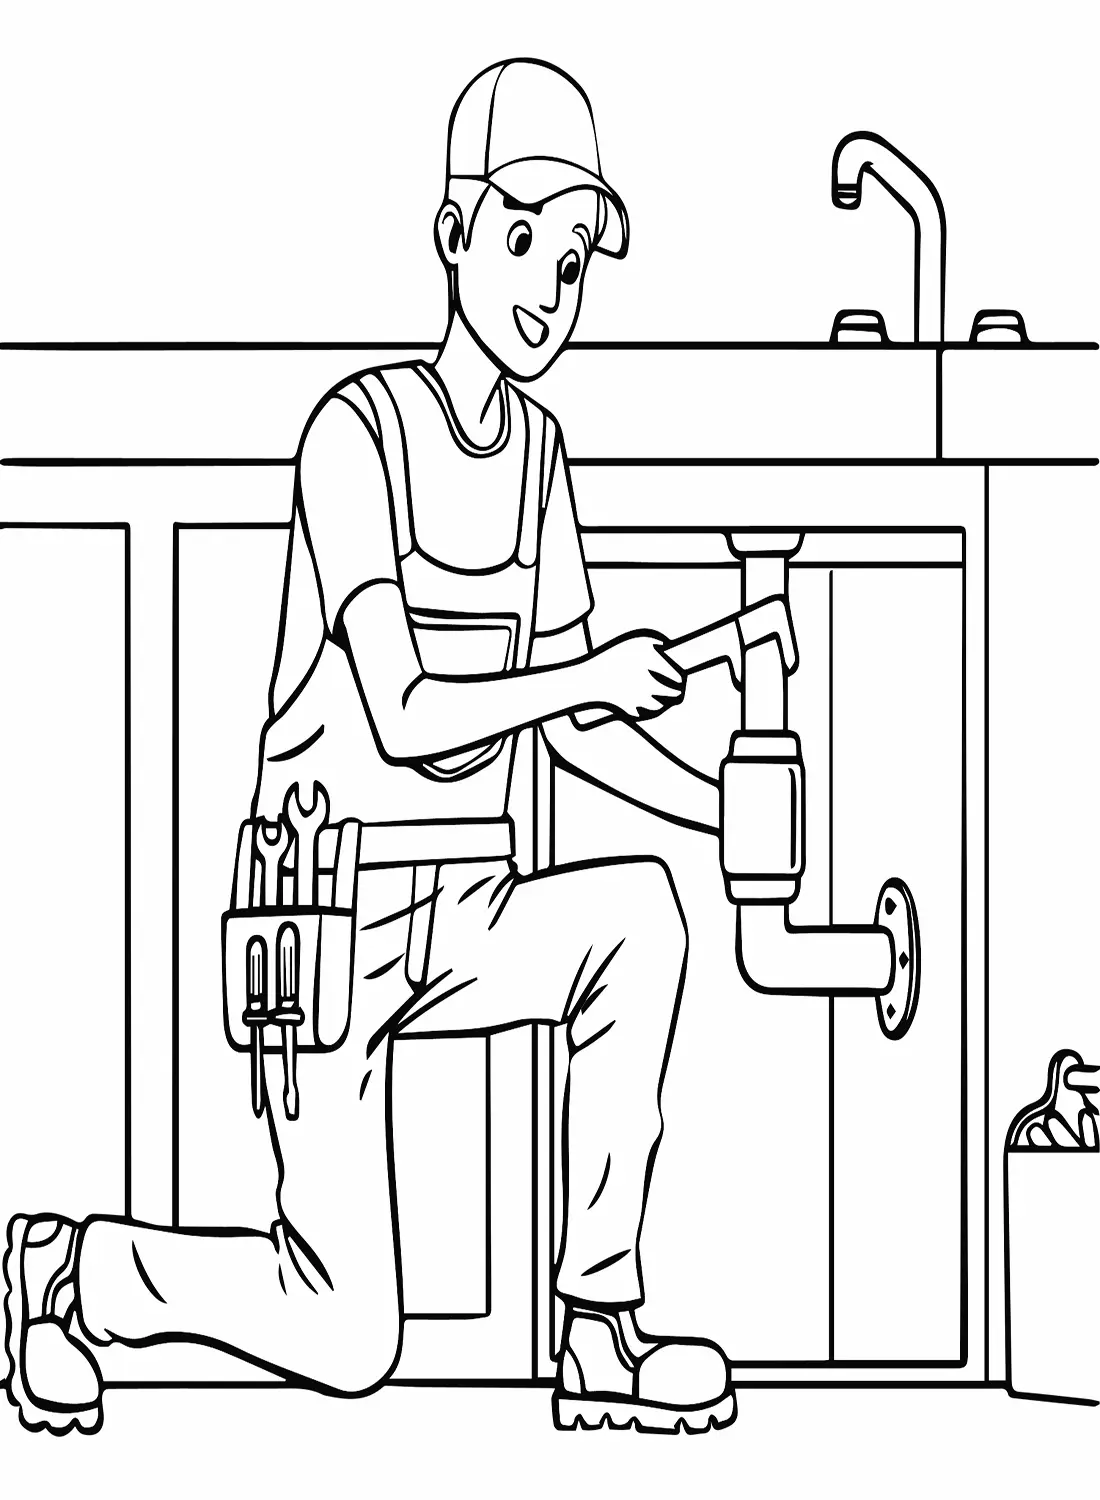 Wrench Coloring Pages